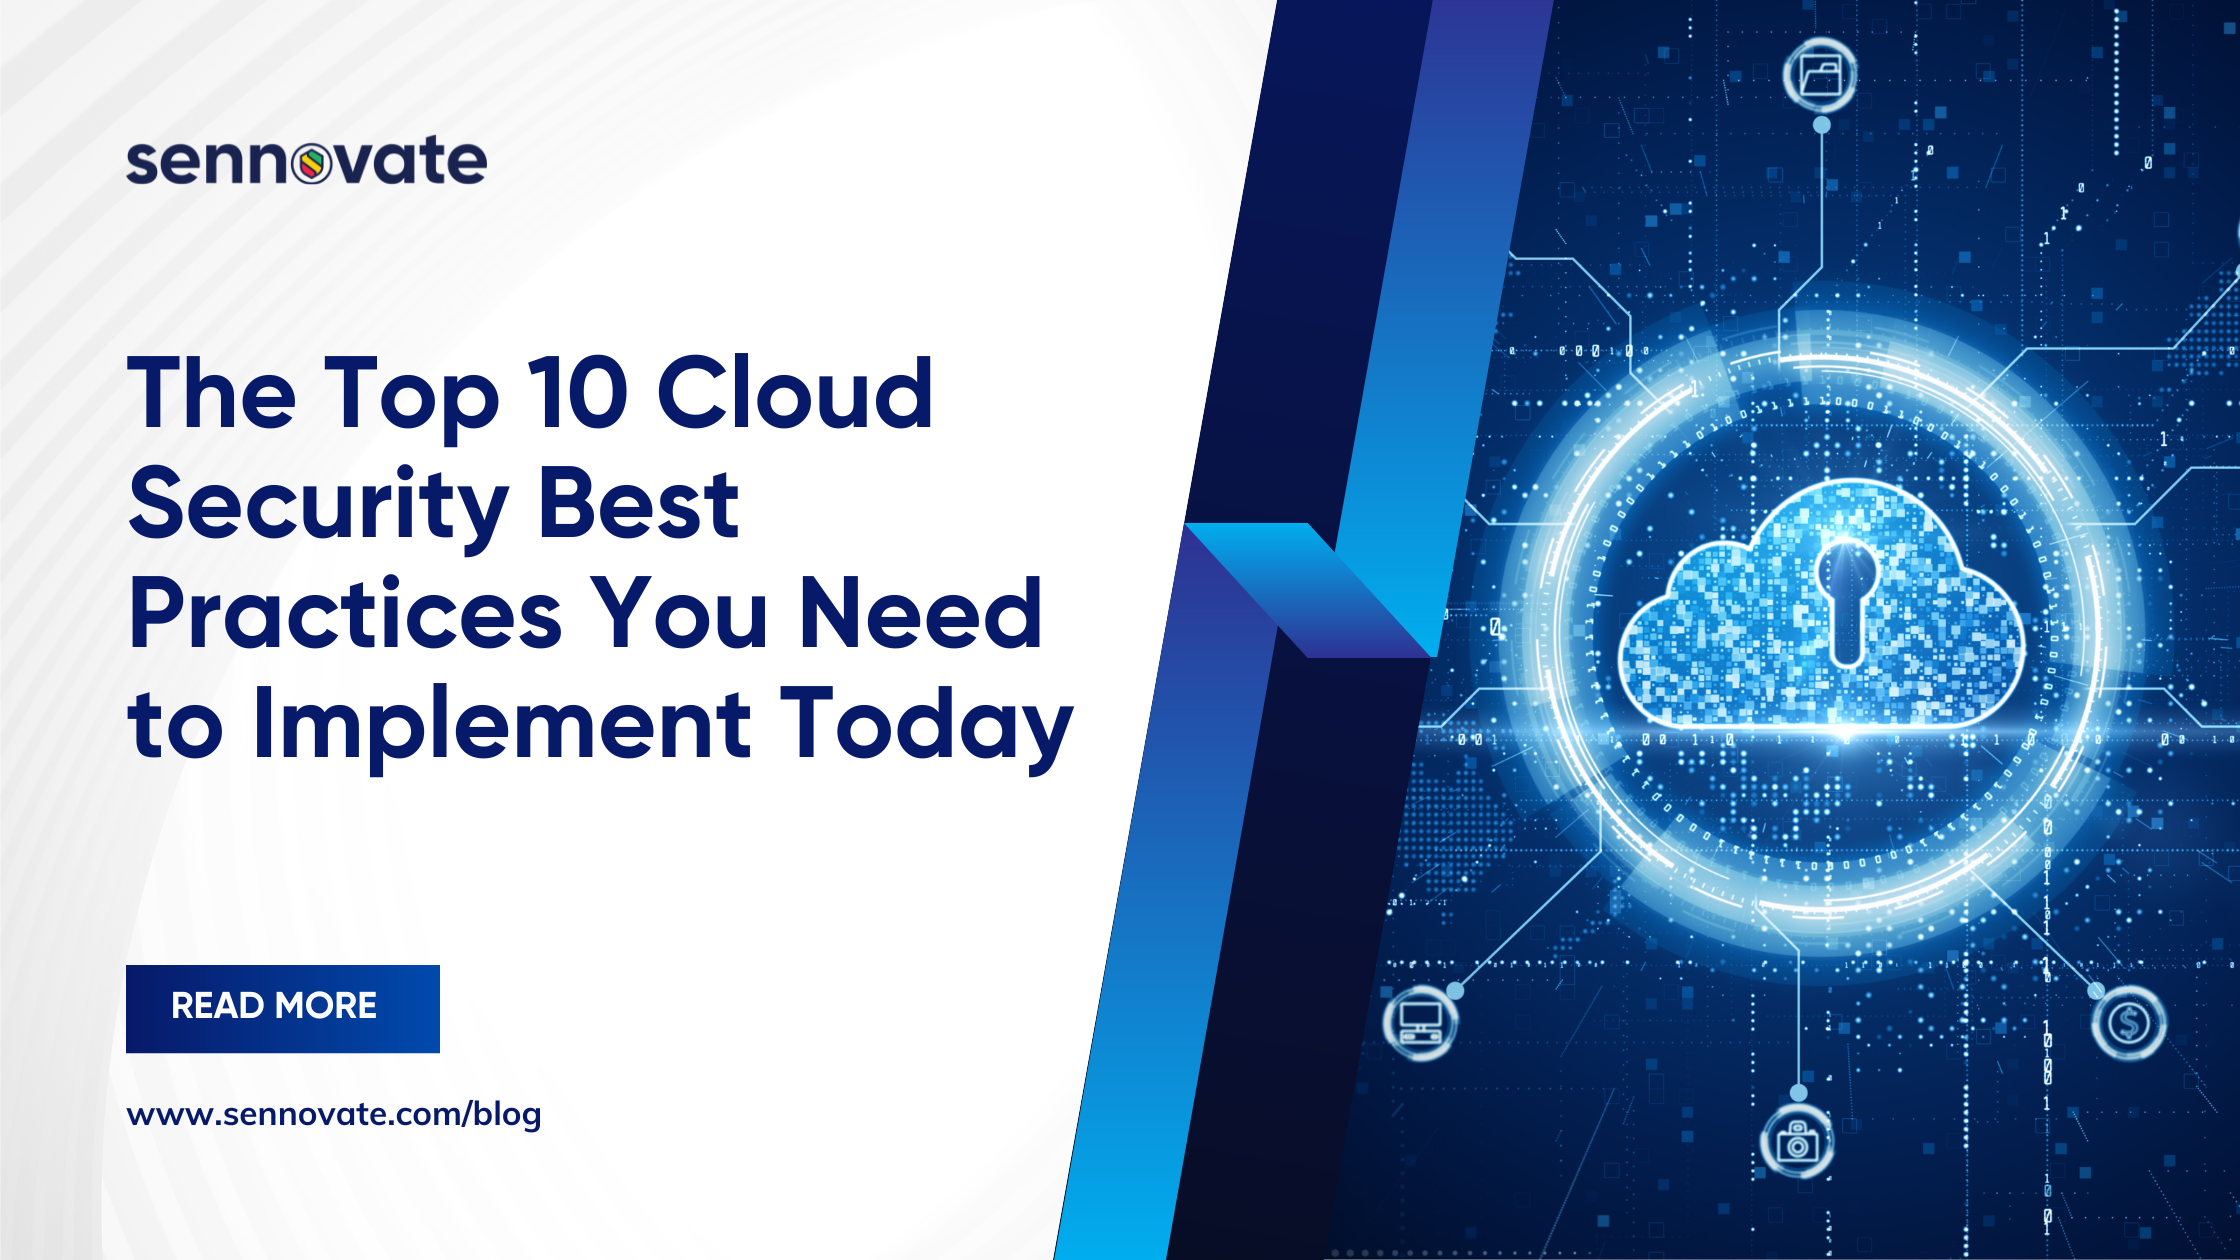 The Top 10 Cloud Security Best Practices You Need to Implement Today